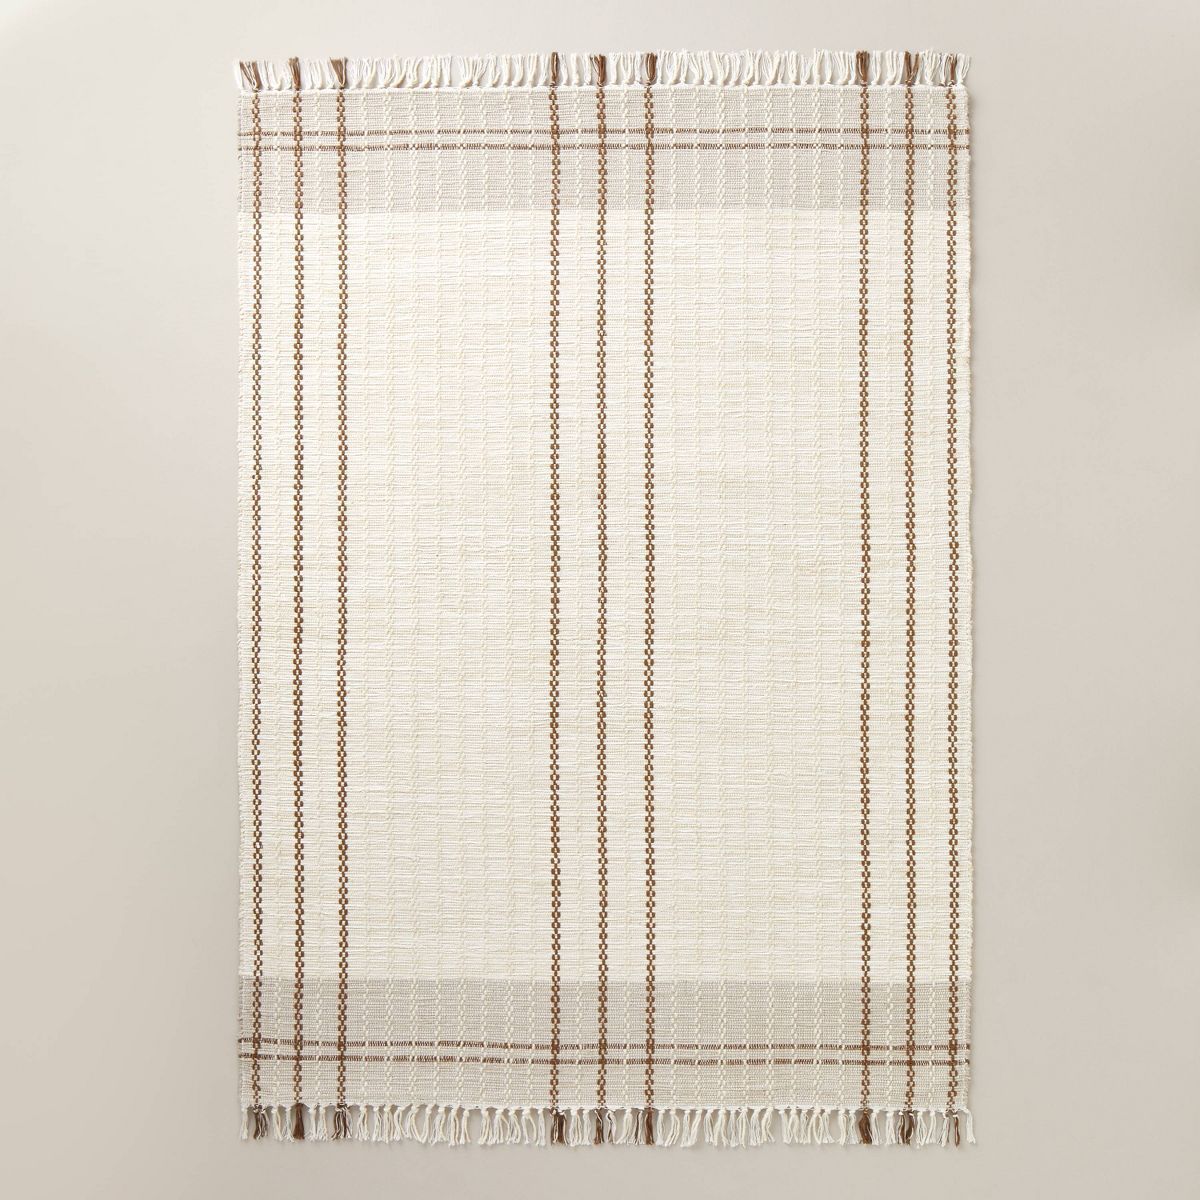 5'x7' Neutral Color Block Plaid Handmade Woven Area Rug Tan/Cream/Cocoa - Hearth & Hand™ with M... | Target